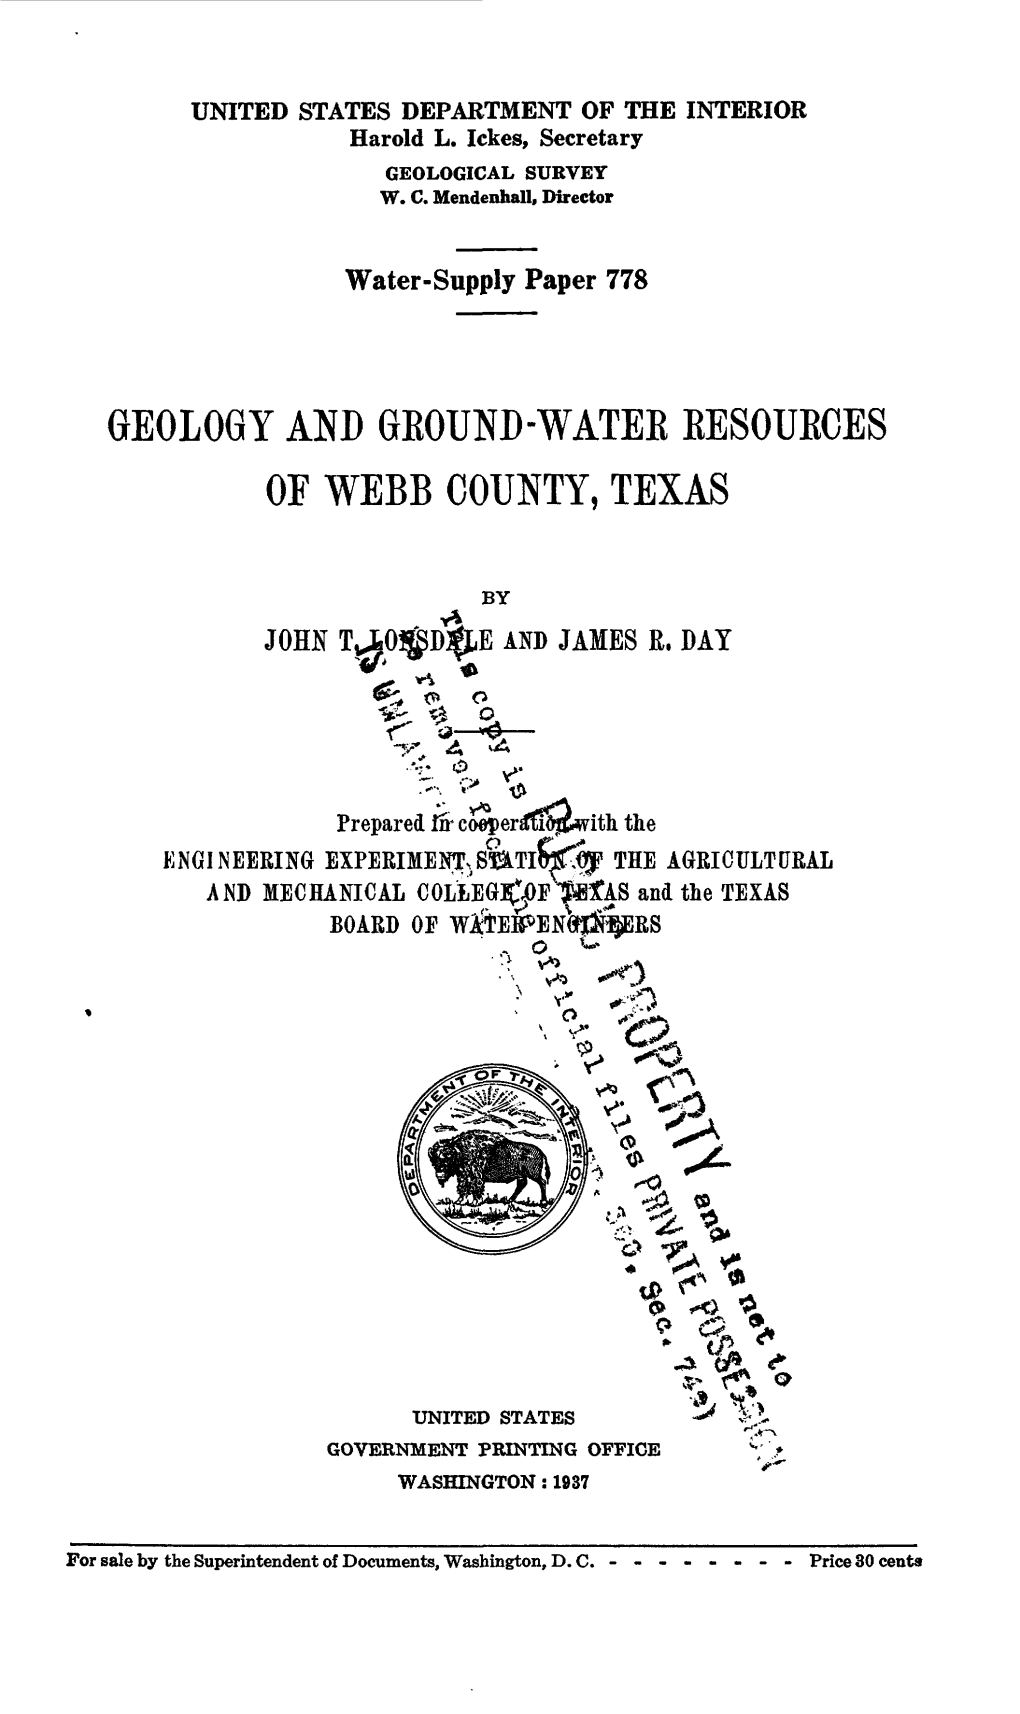 Geology and Gbound-Wateb Eesoueces of Webb County, Texas